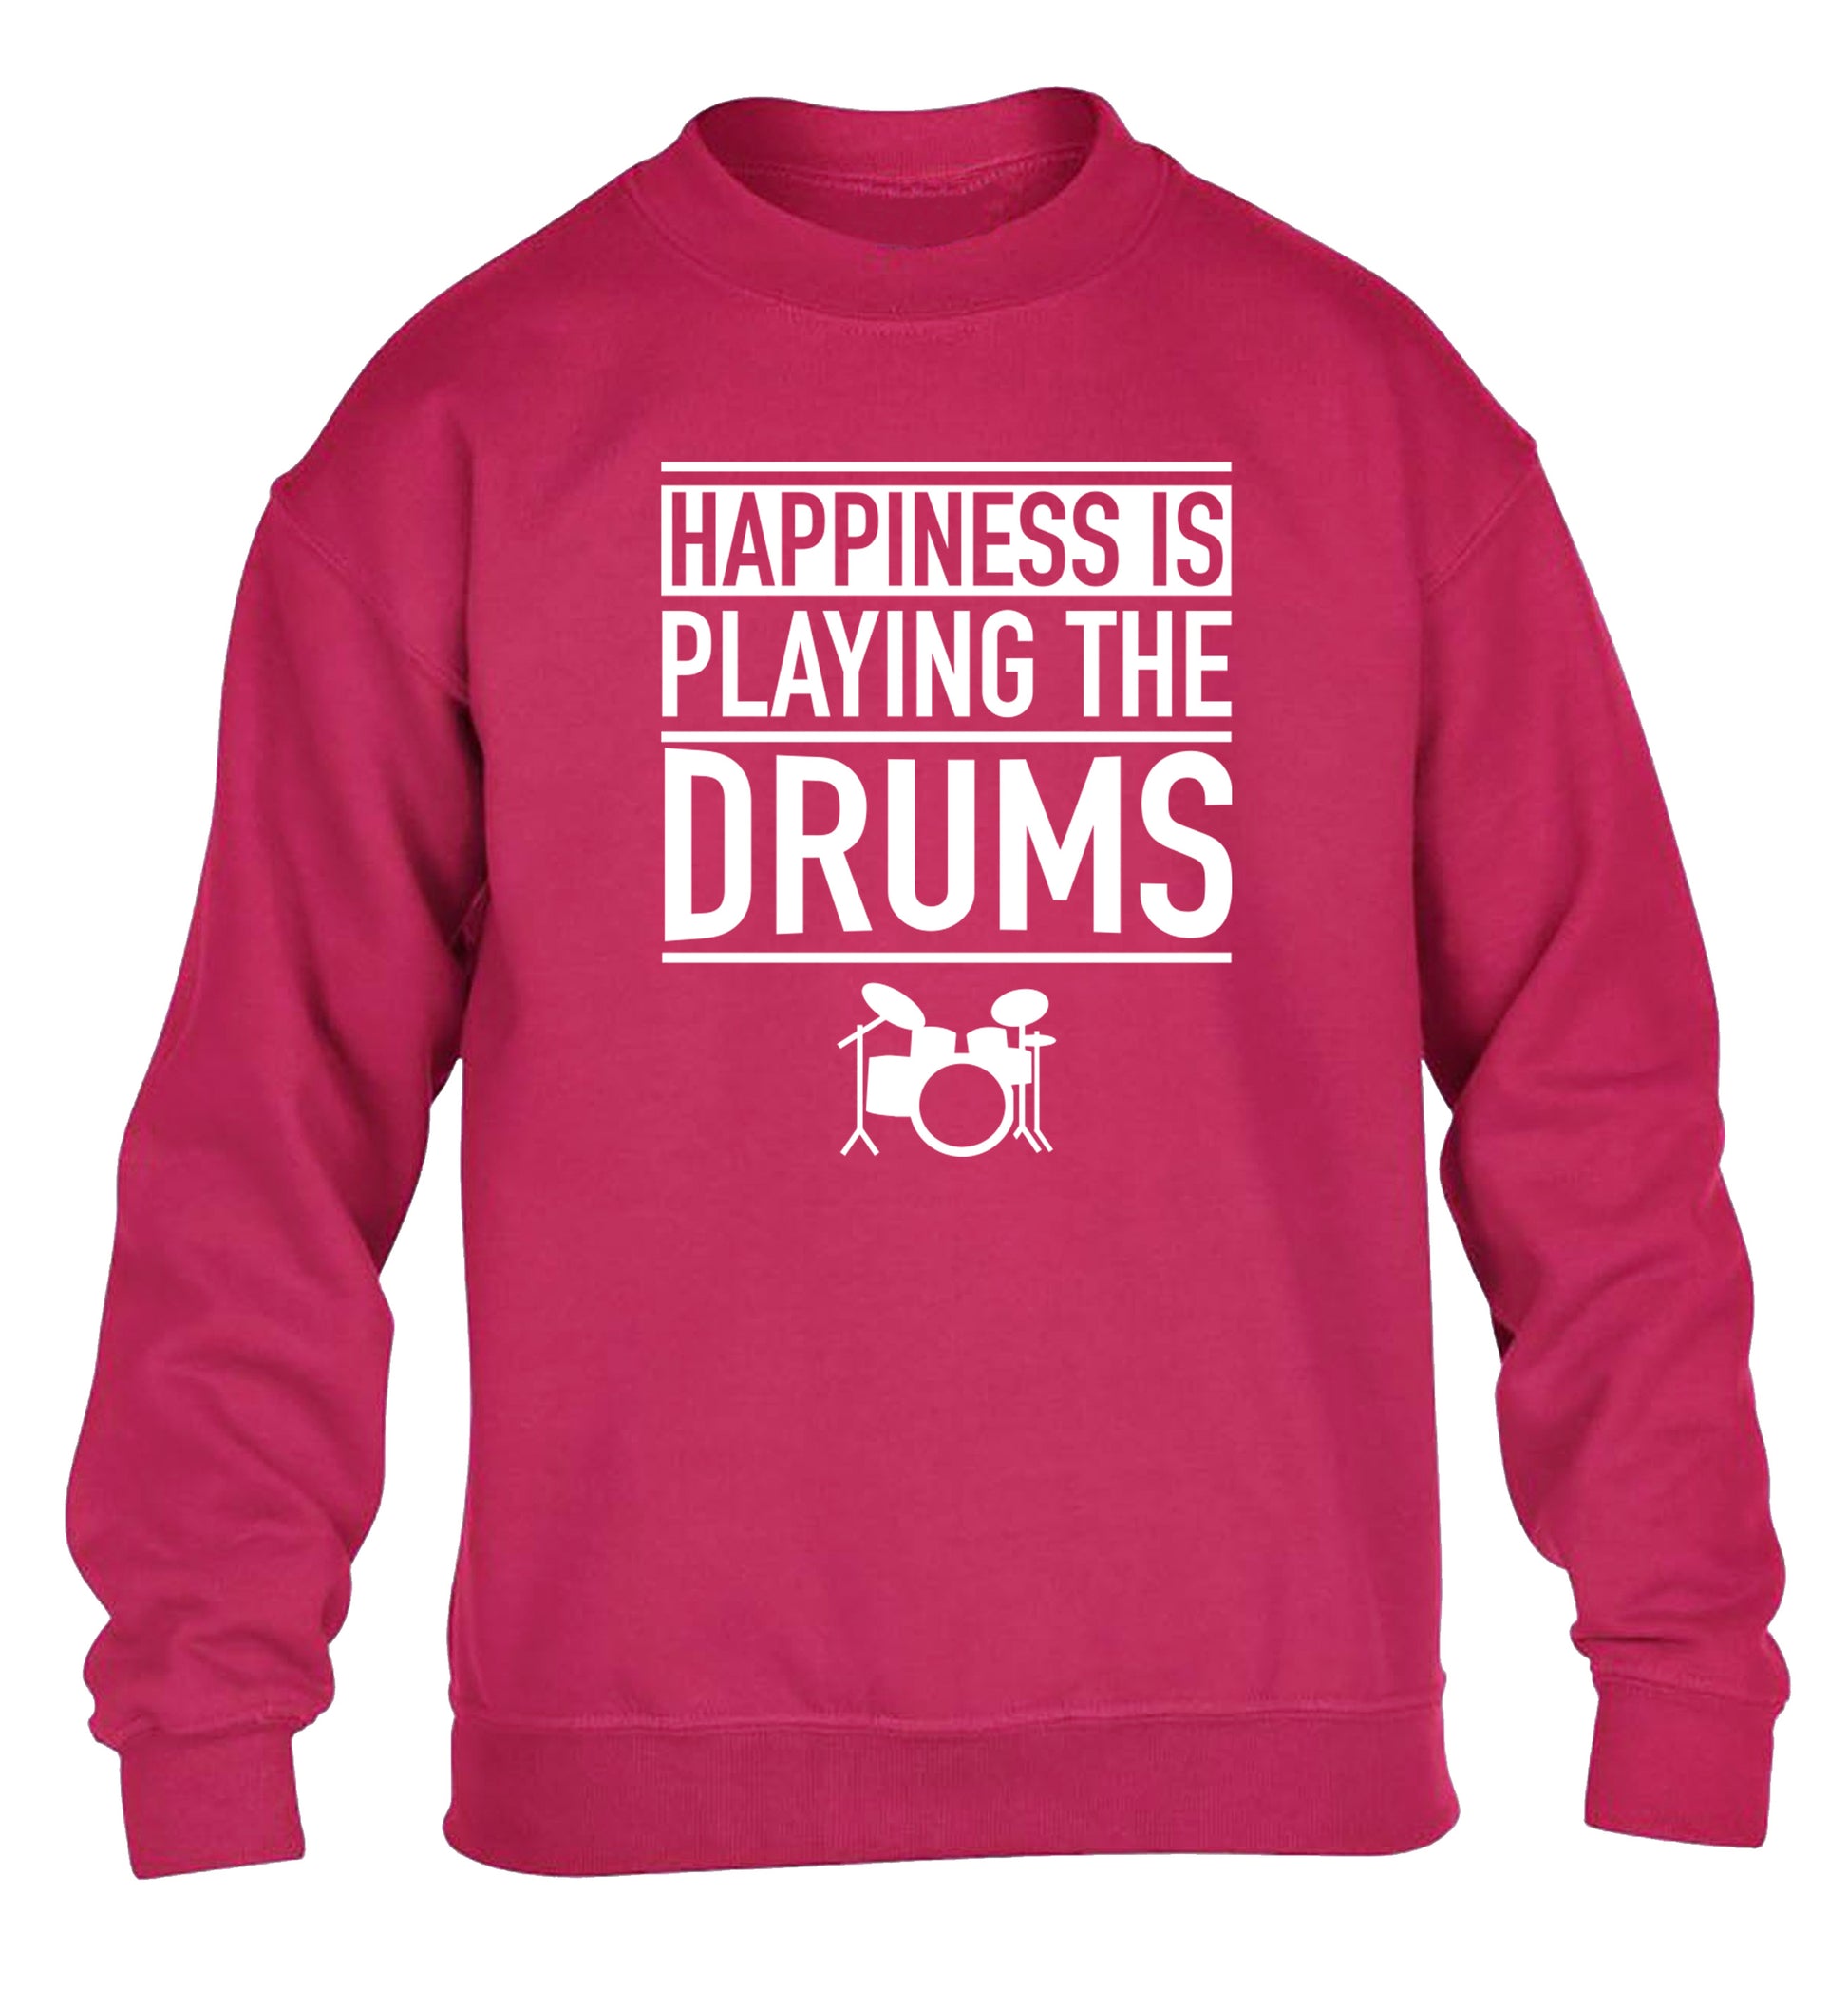 Happiness is playing the drums children's pink sweater 12-14 Years